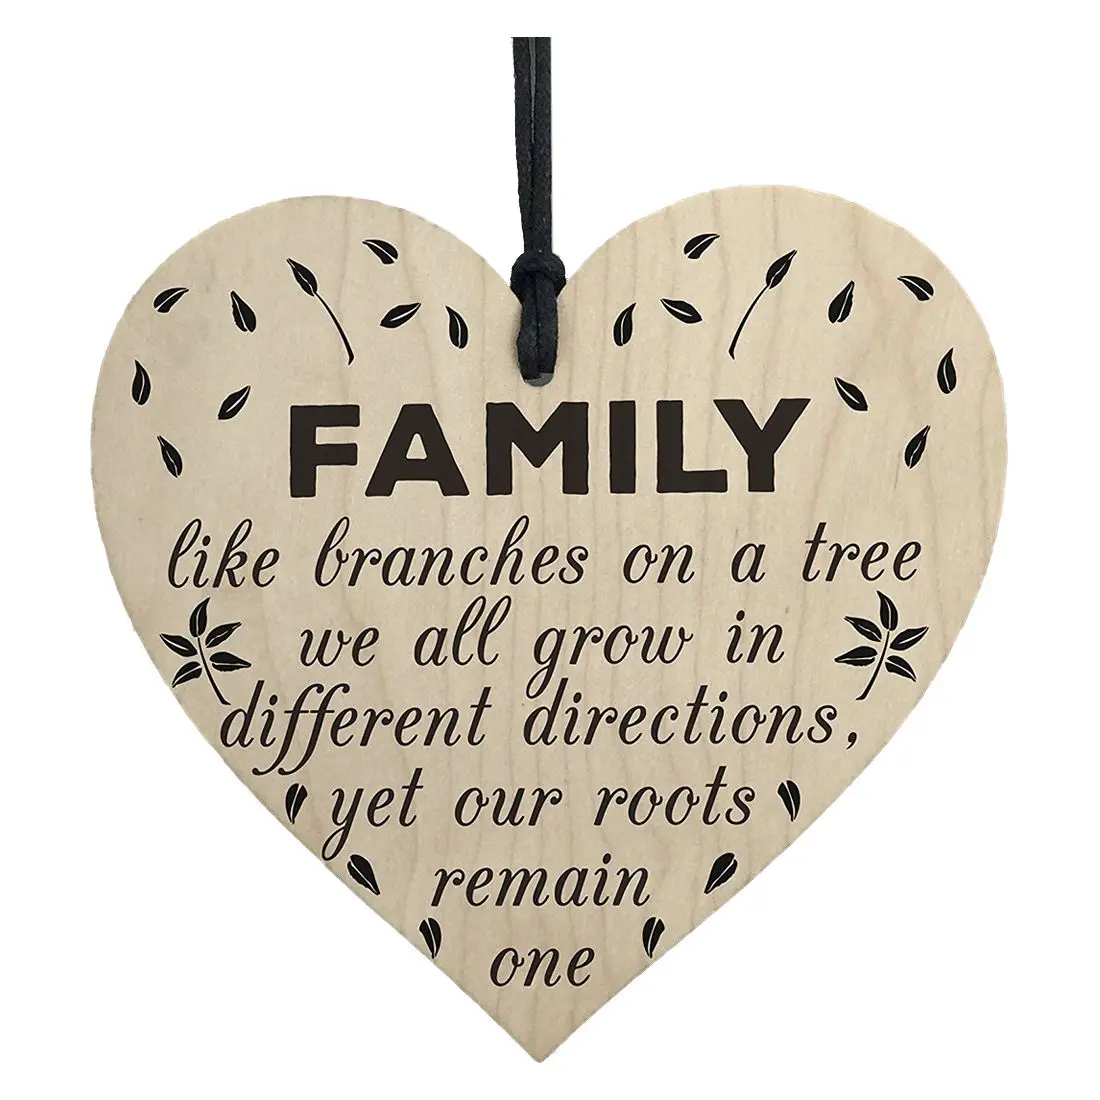 Фото Hot Sale Family Roots Remain One Wooden Hanging Heart Shaped Families Plaque Love Gift | Дом и сад